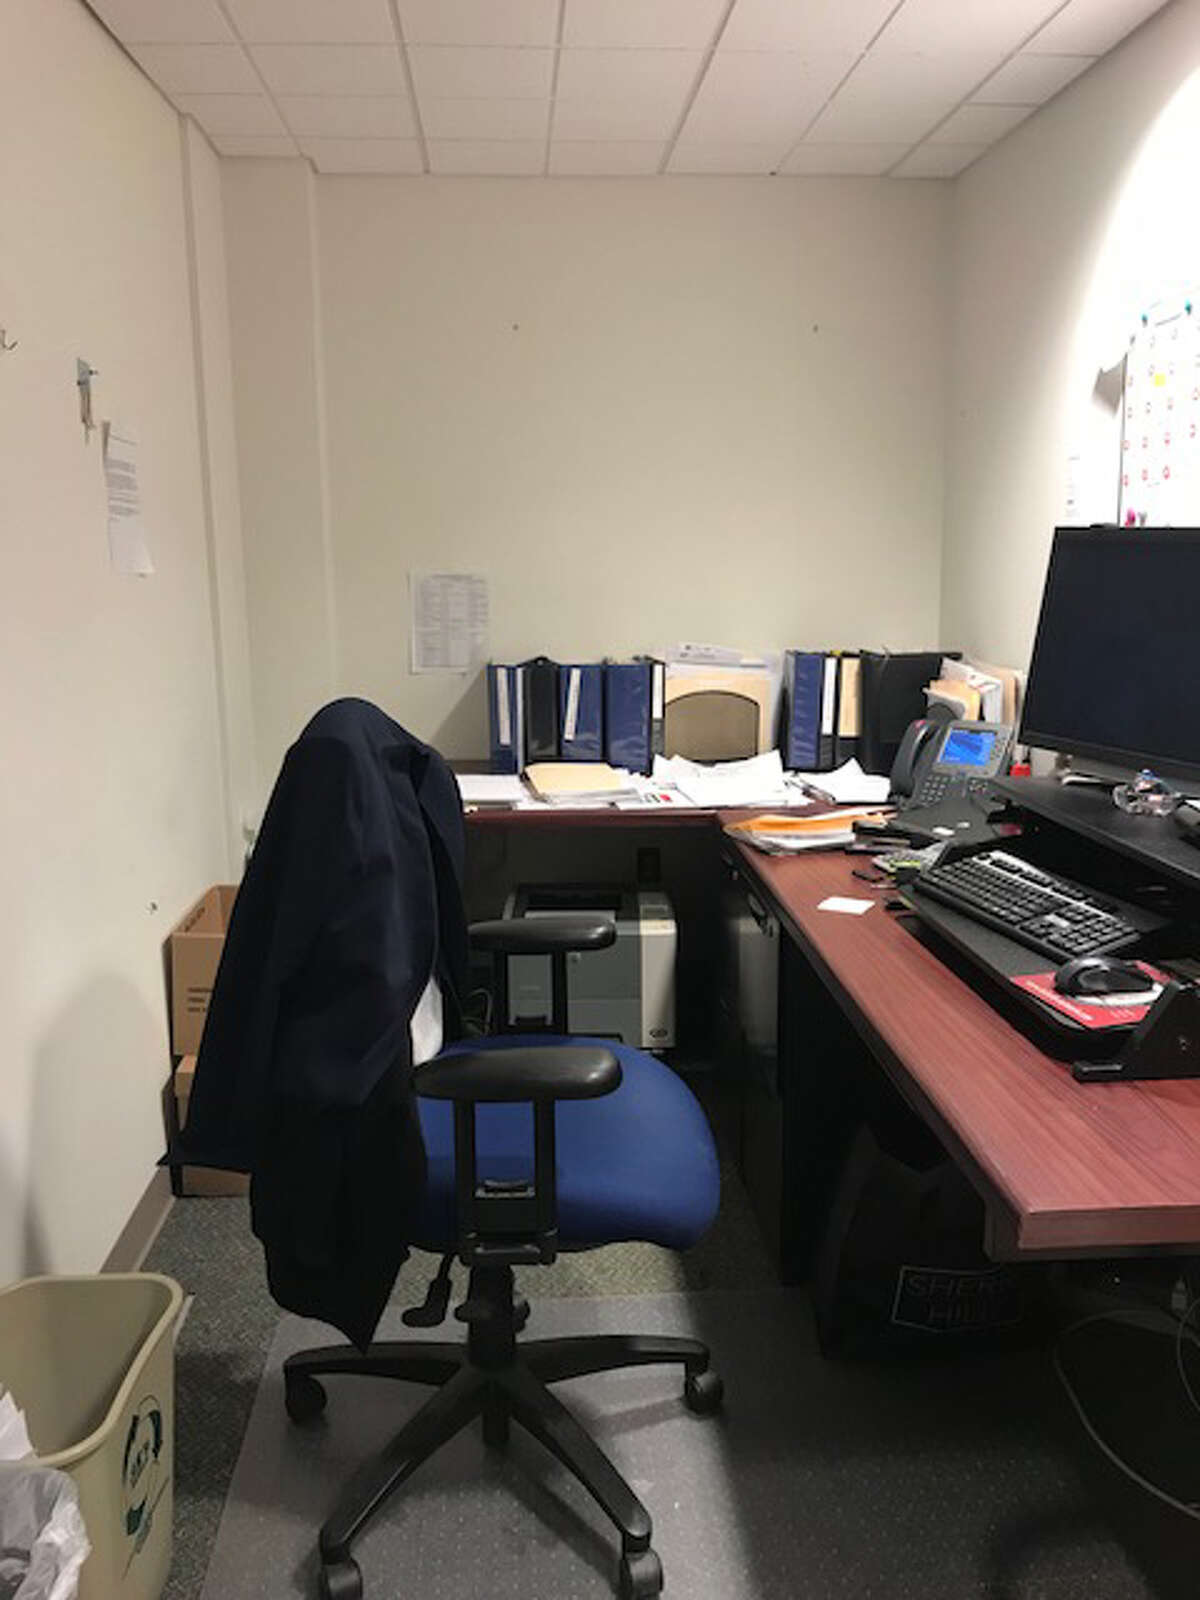 Kimberly Schiavone, a DCJS employee, was transferred against her wishes and ordered to take this office that was previously used as a closet after she cooperated in a sexual harassment investigation last year.